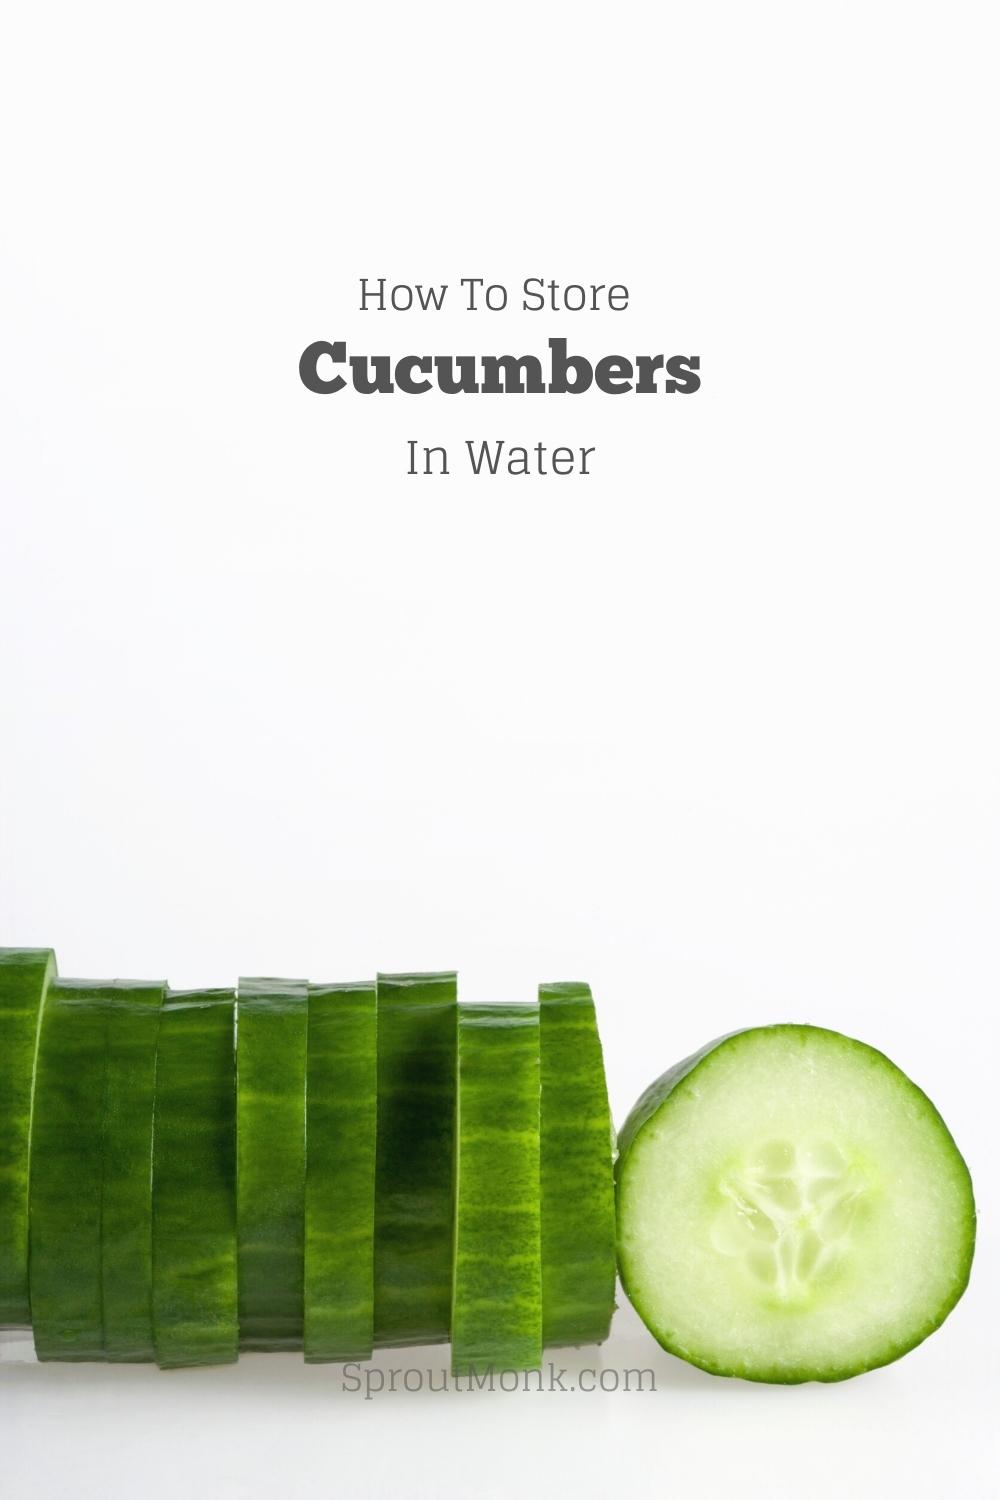 storing cucumbers in water cover image